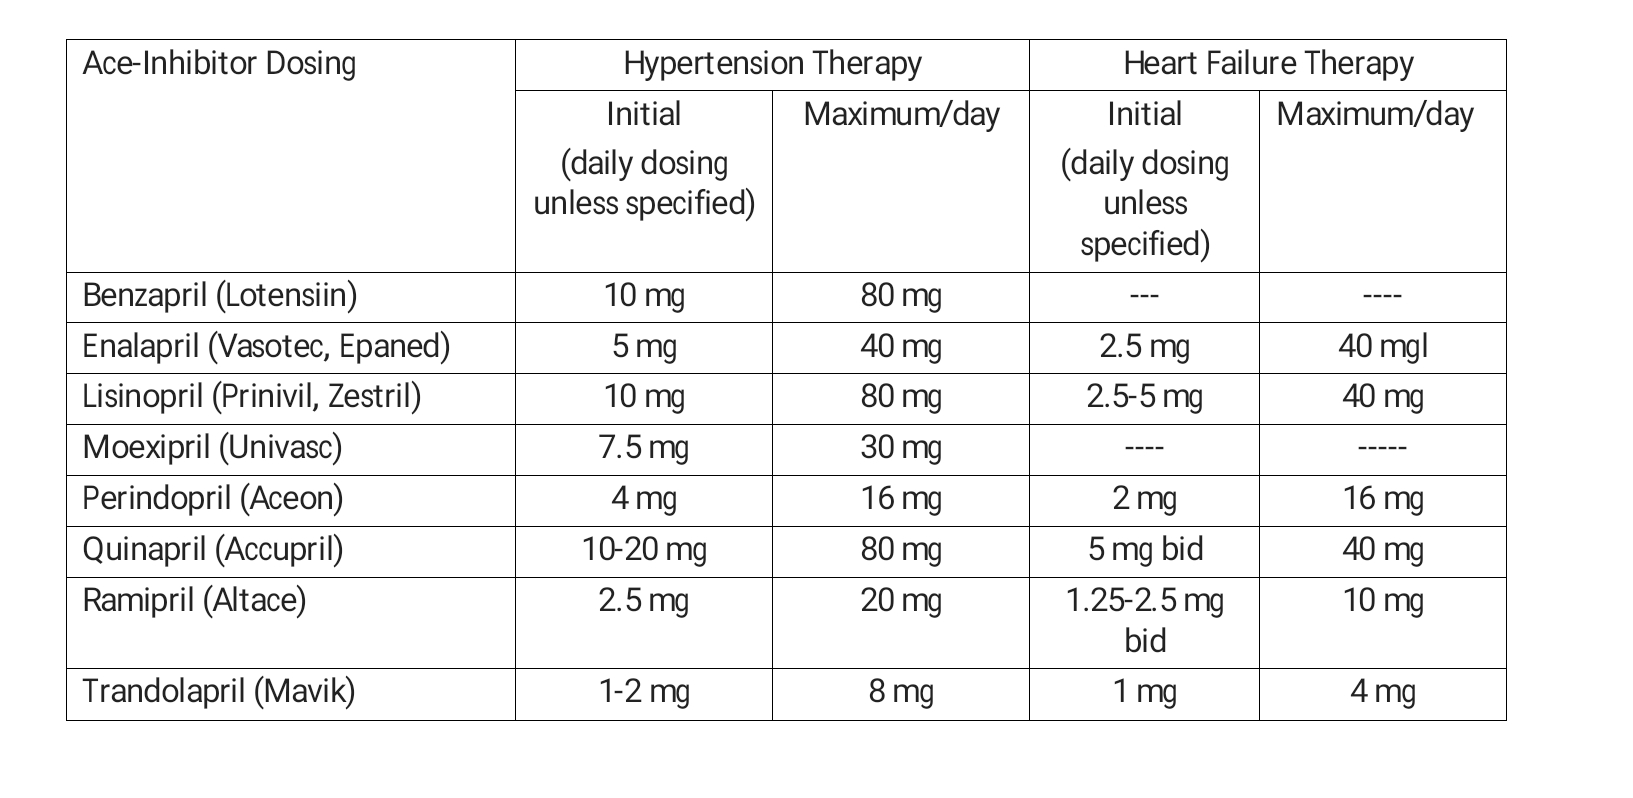 Dicarboxyl-containing ACE inhibitors and doses
